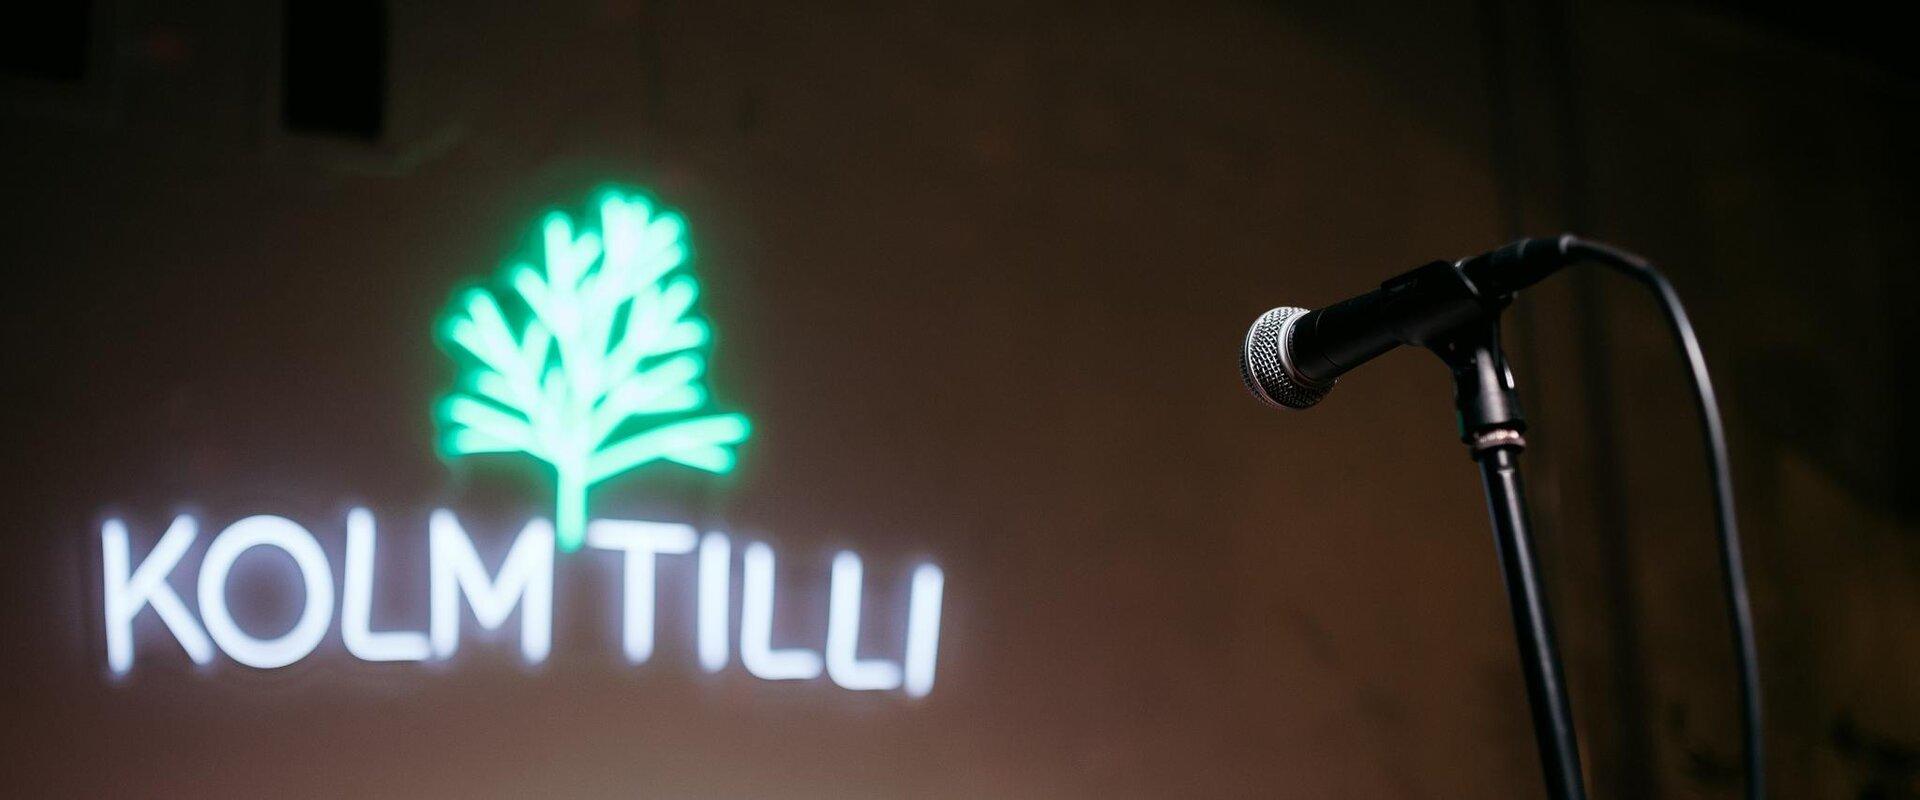 Kolm Tilli is a restaurant inspired by street food in the Aparaaditehas Creative City. We focus on street food: there is an open kitchen in the middle